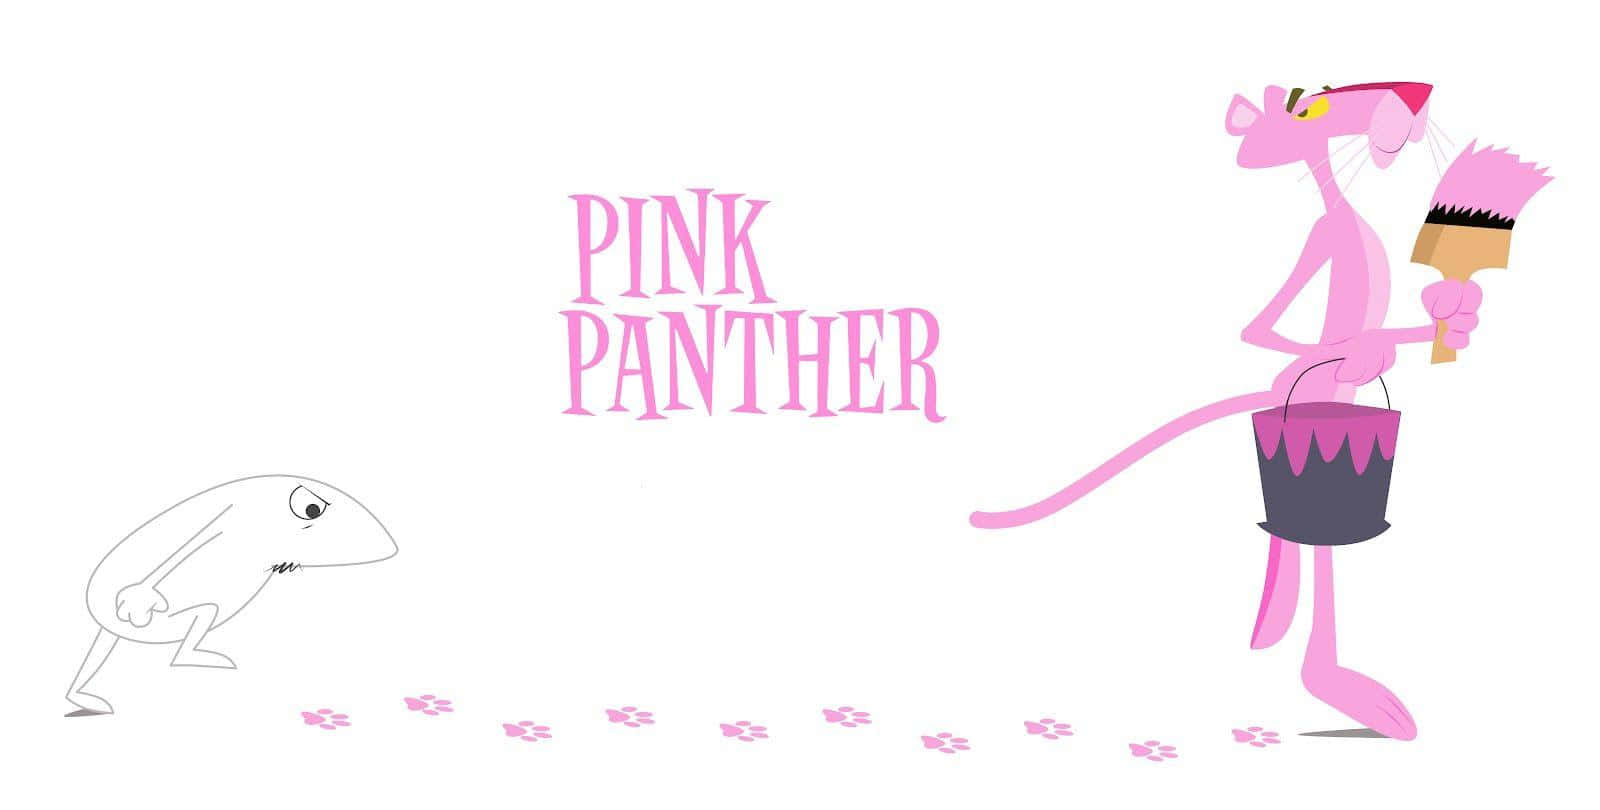 Pink Pantherand The Little Man Chase